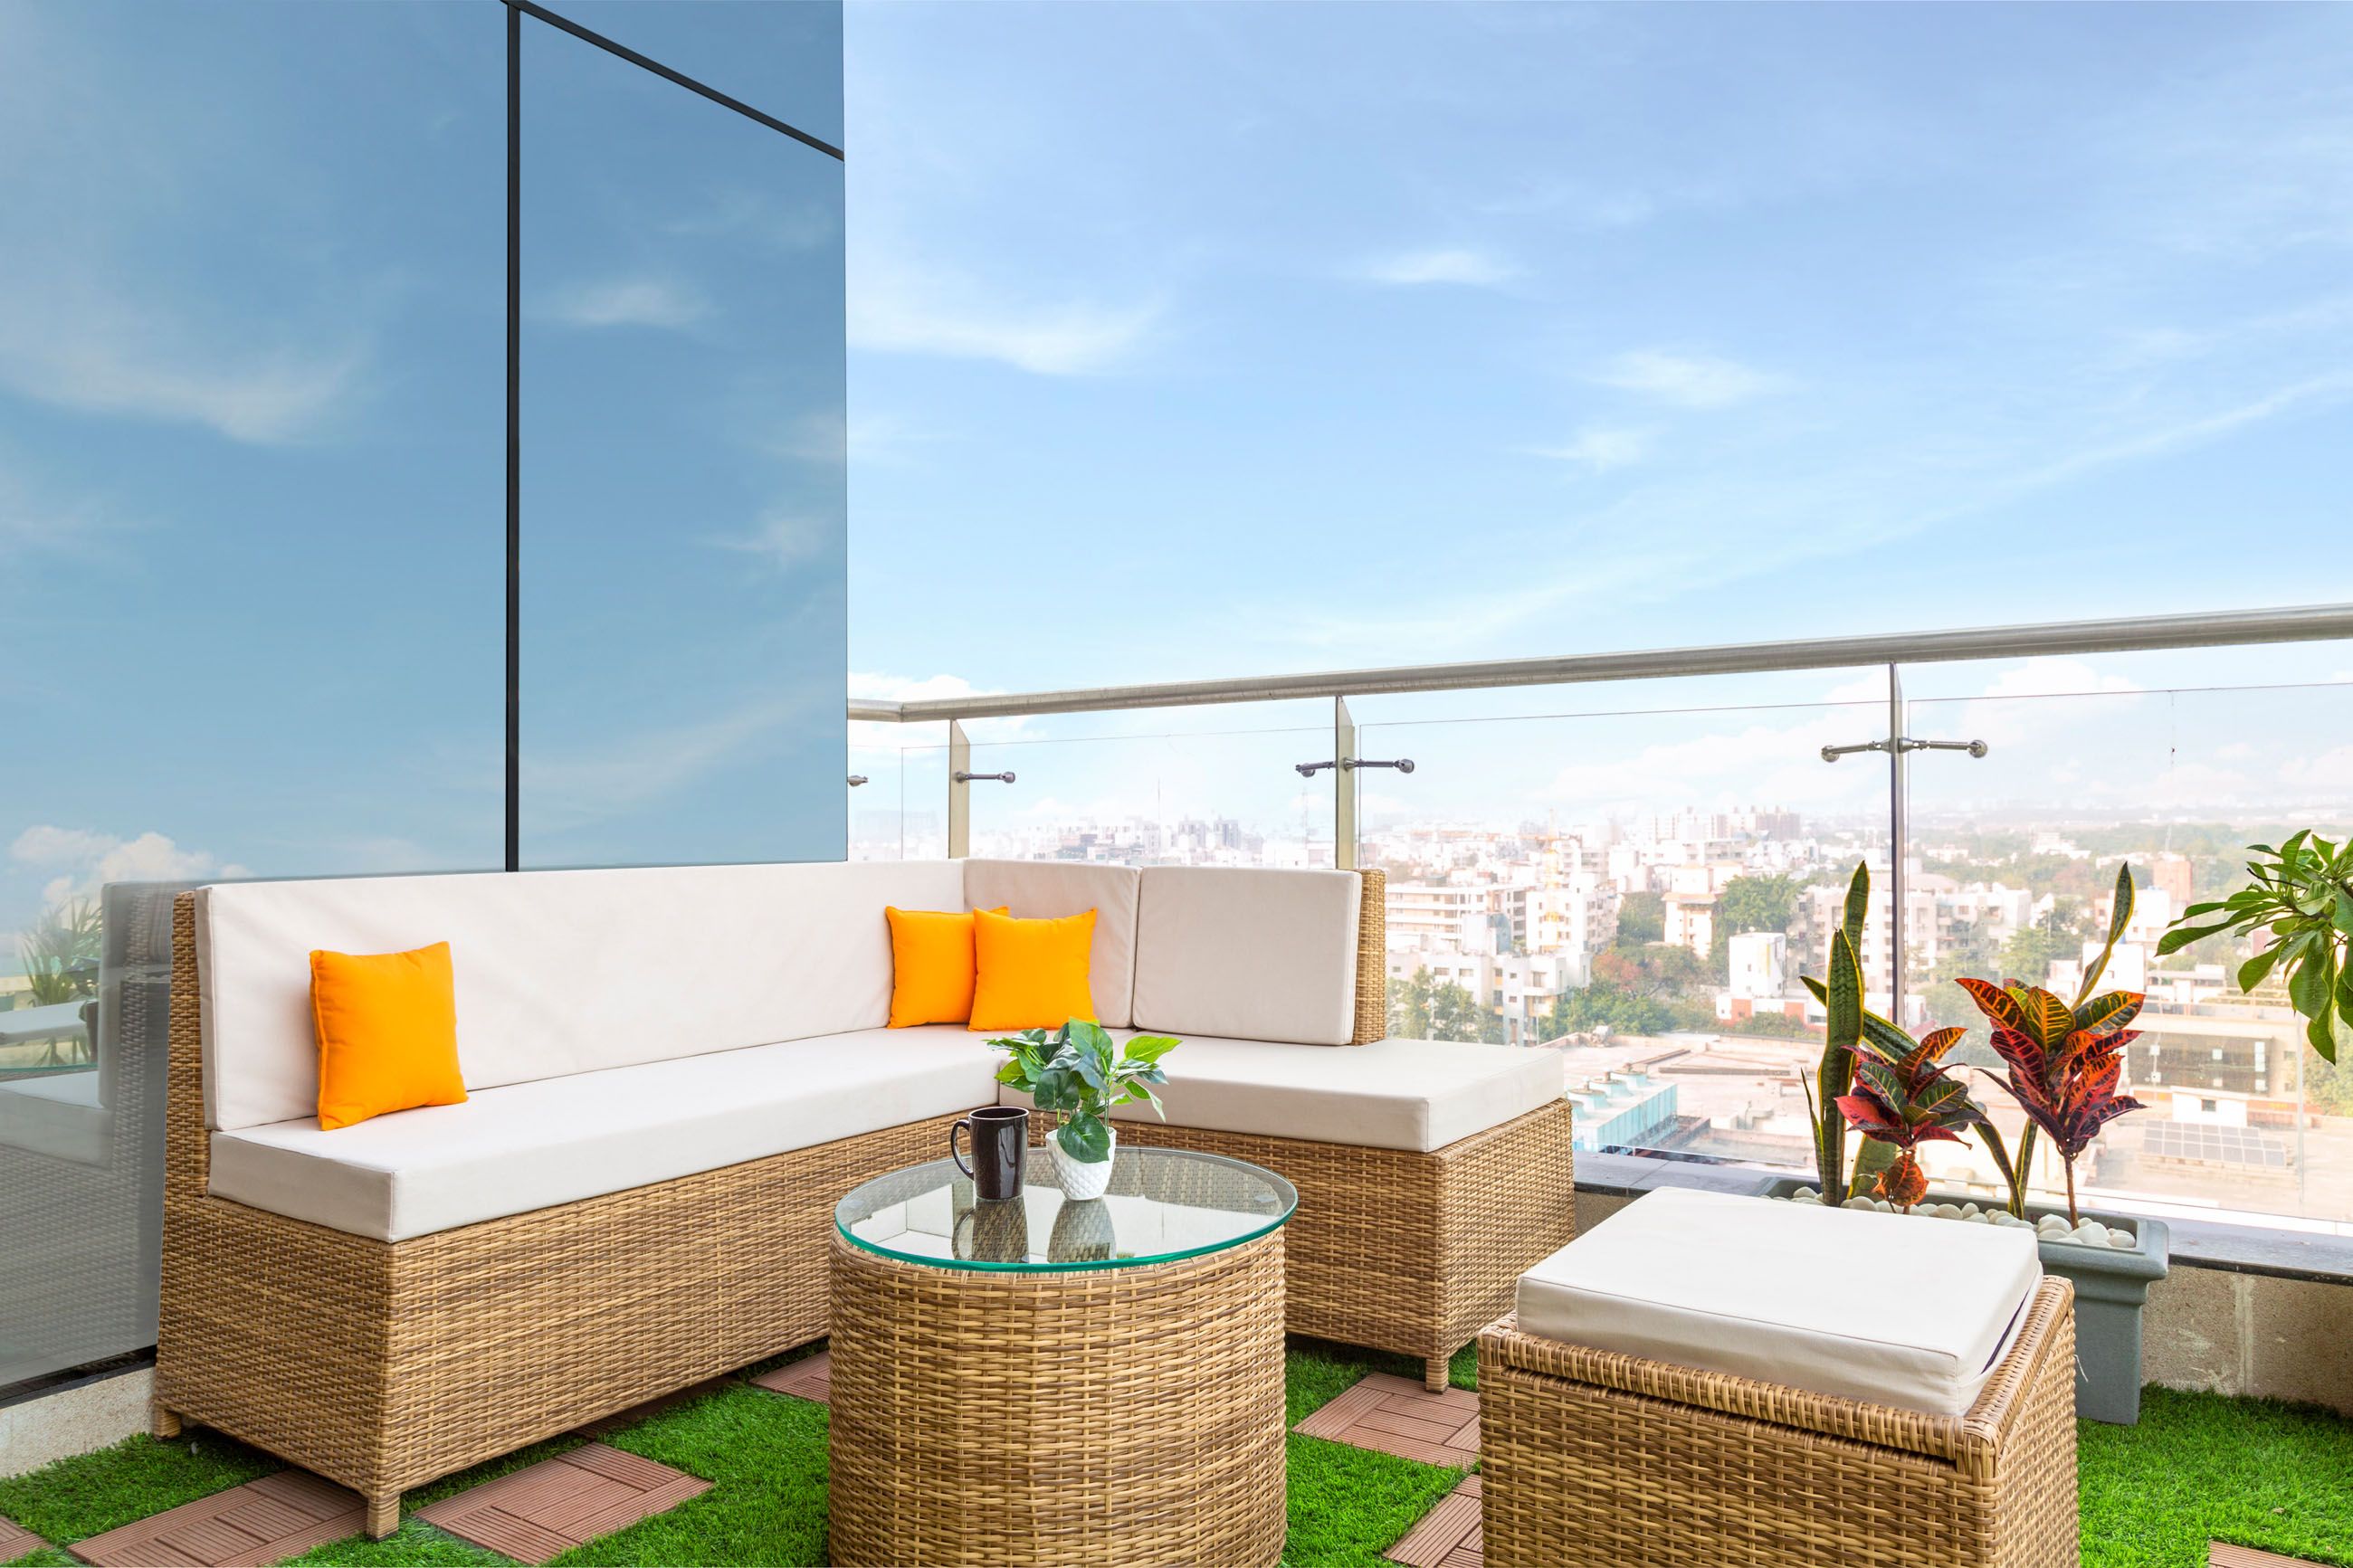 Modern Balcony Design with Glass Wall and Stylish Furniture